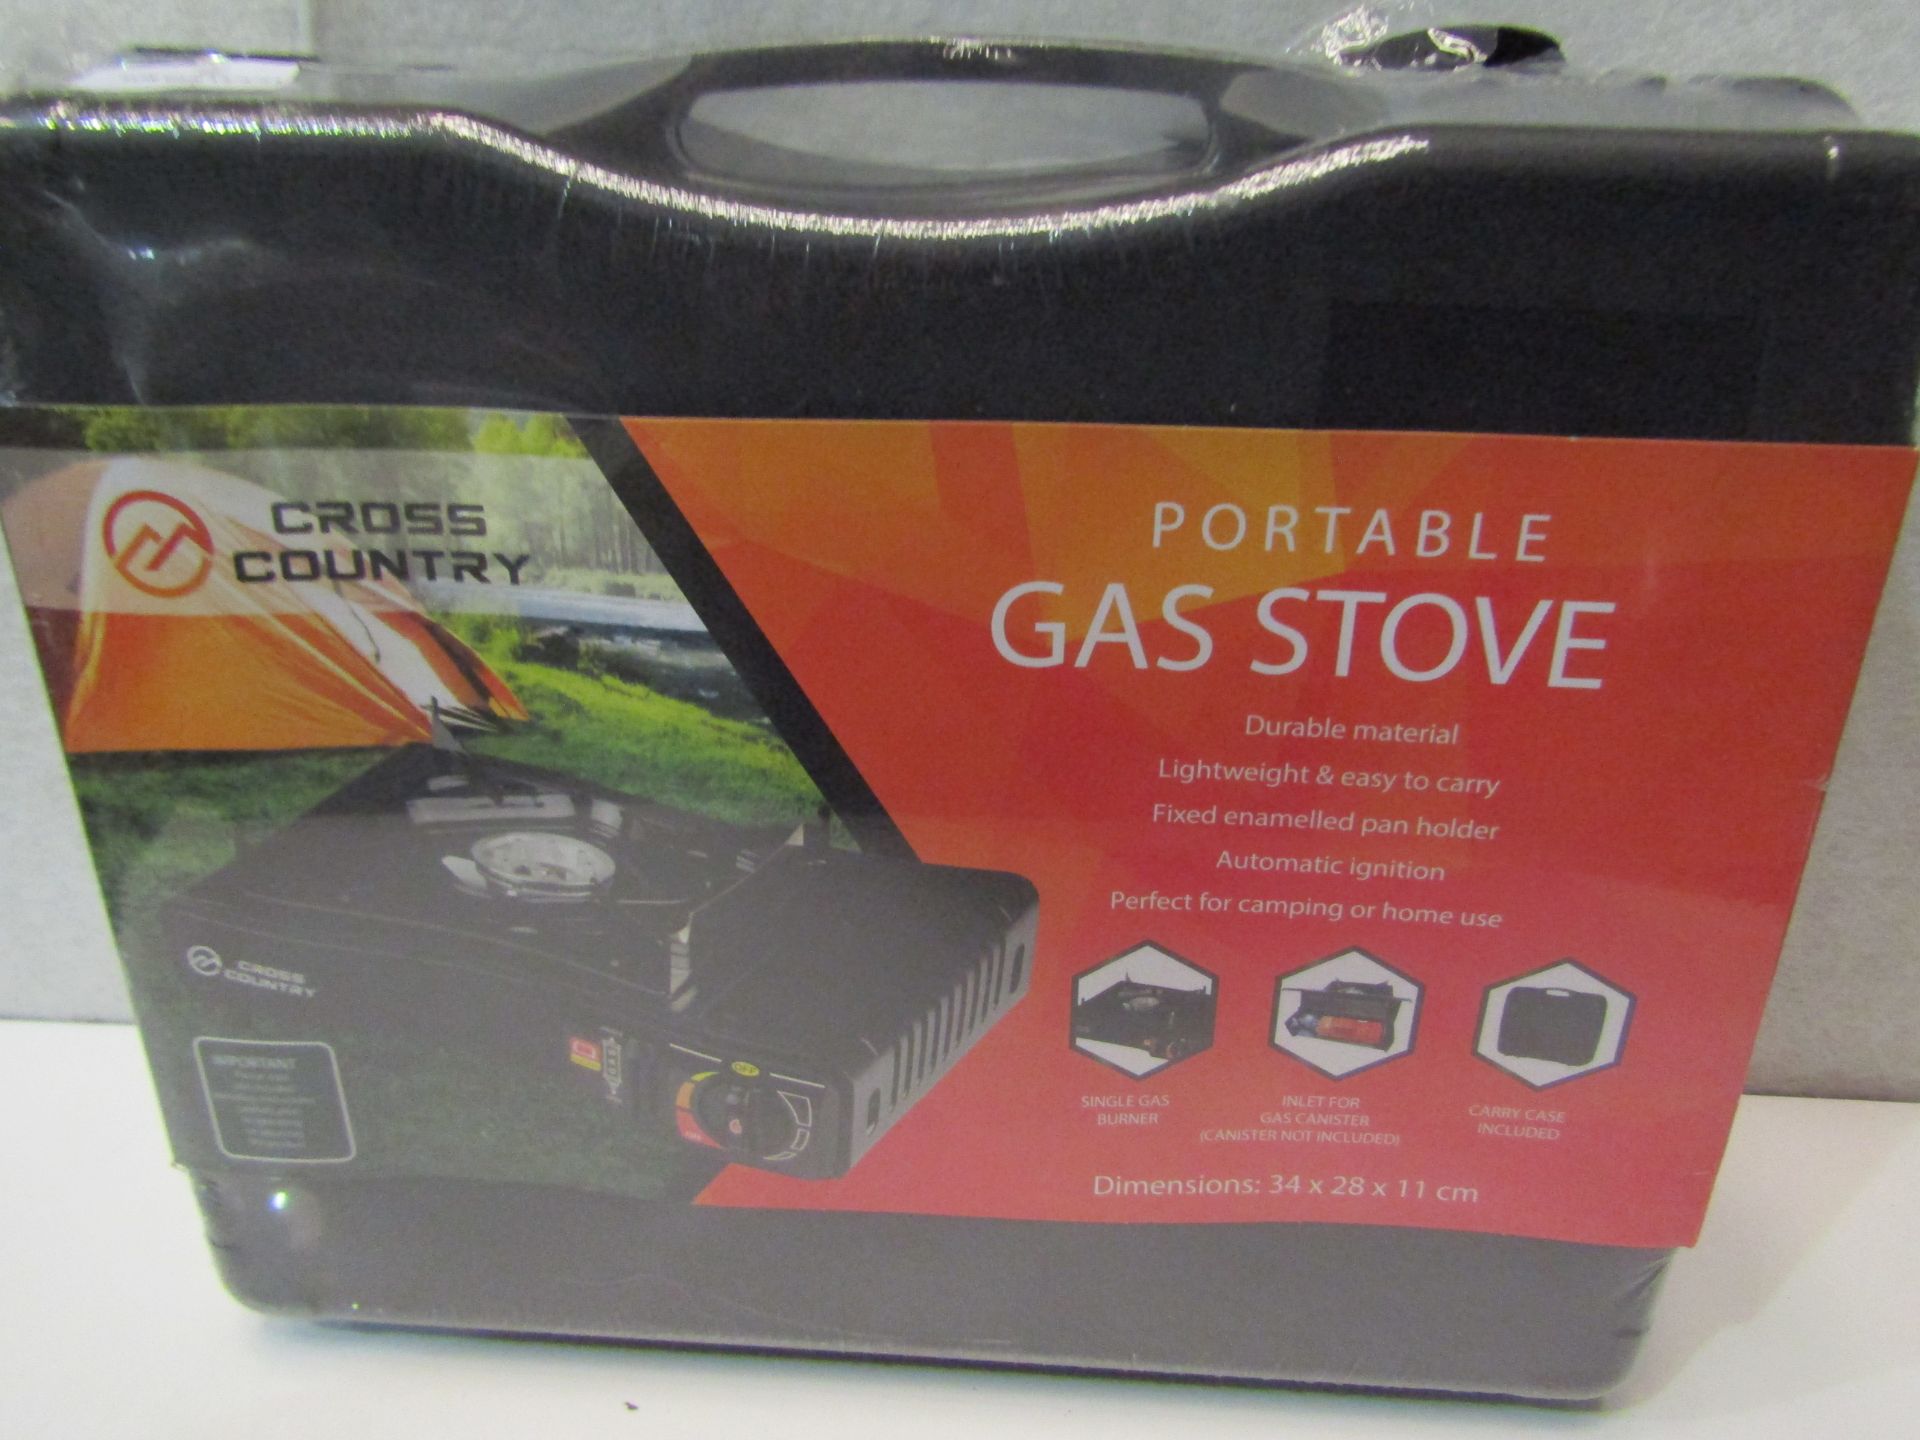 Cross Country Portable Gas Stove, Size: 34 x 28 x 11cm - Still Factory Sealed However The Case Is